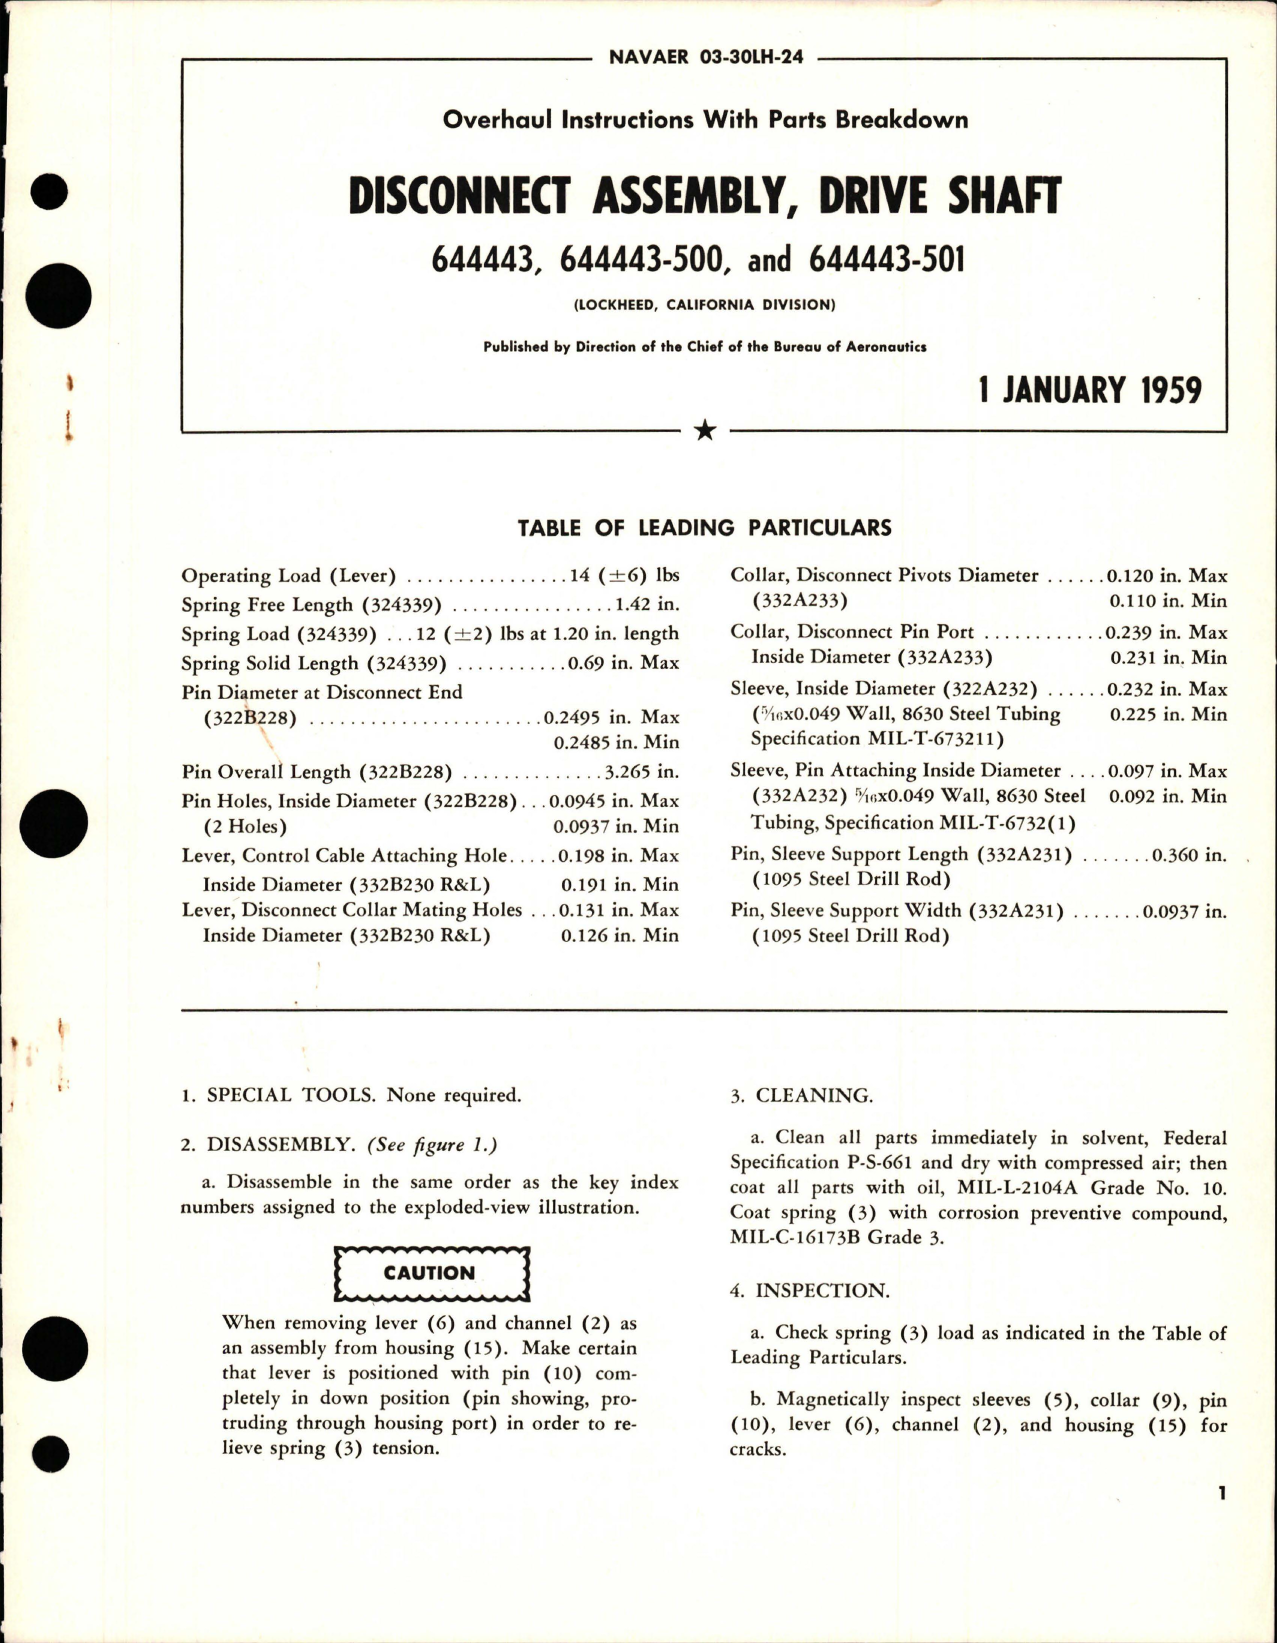 Sample page 1 from AirCorps Library document: Overhaul Instructions with Parts Breakdown for Drive Shaft Disconnect Assembly - Parts 644443, 644443-500, and 644443-501 